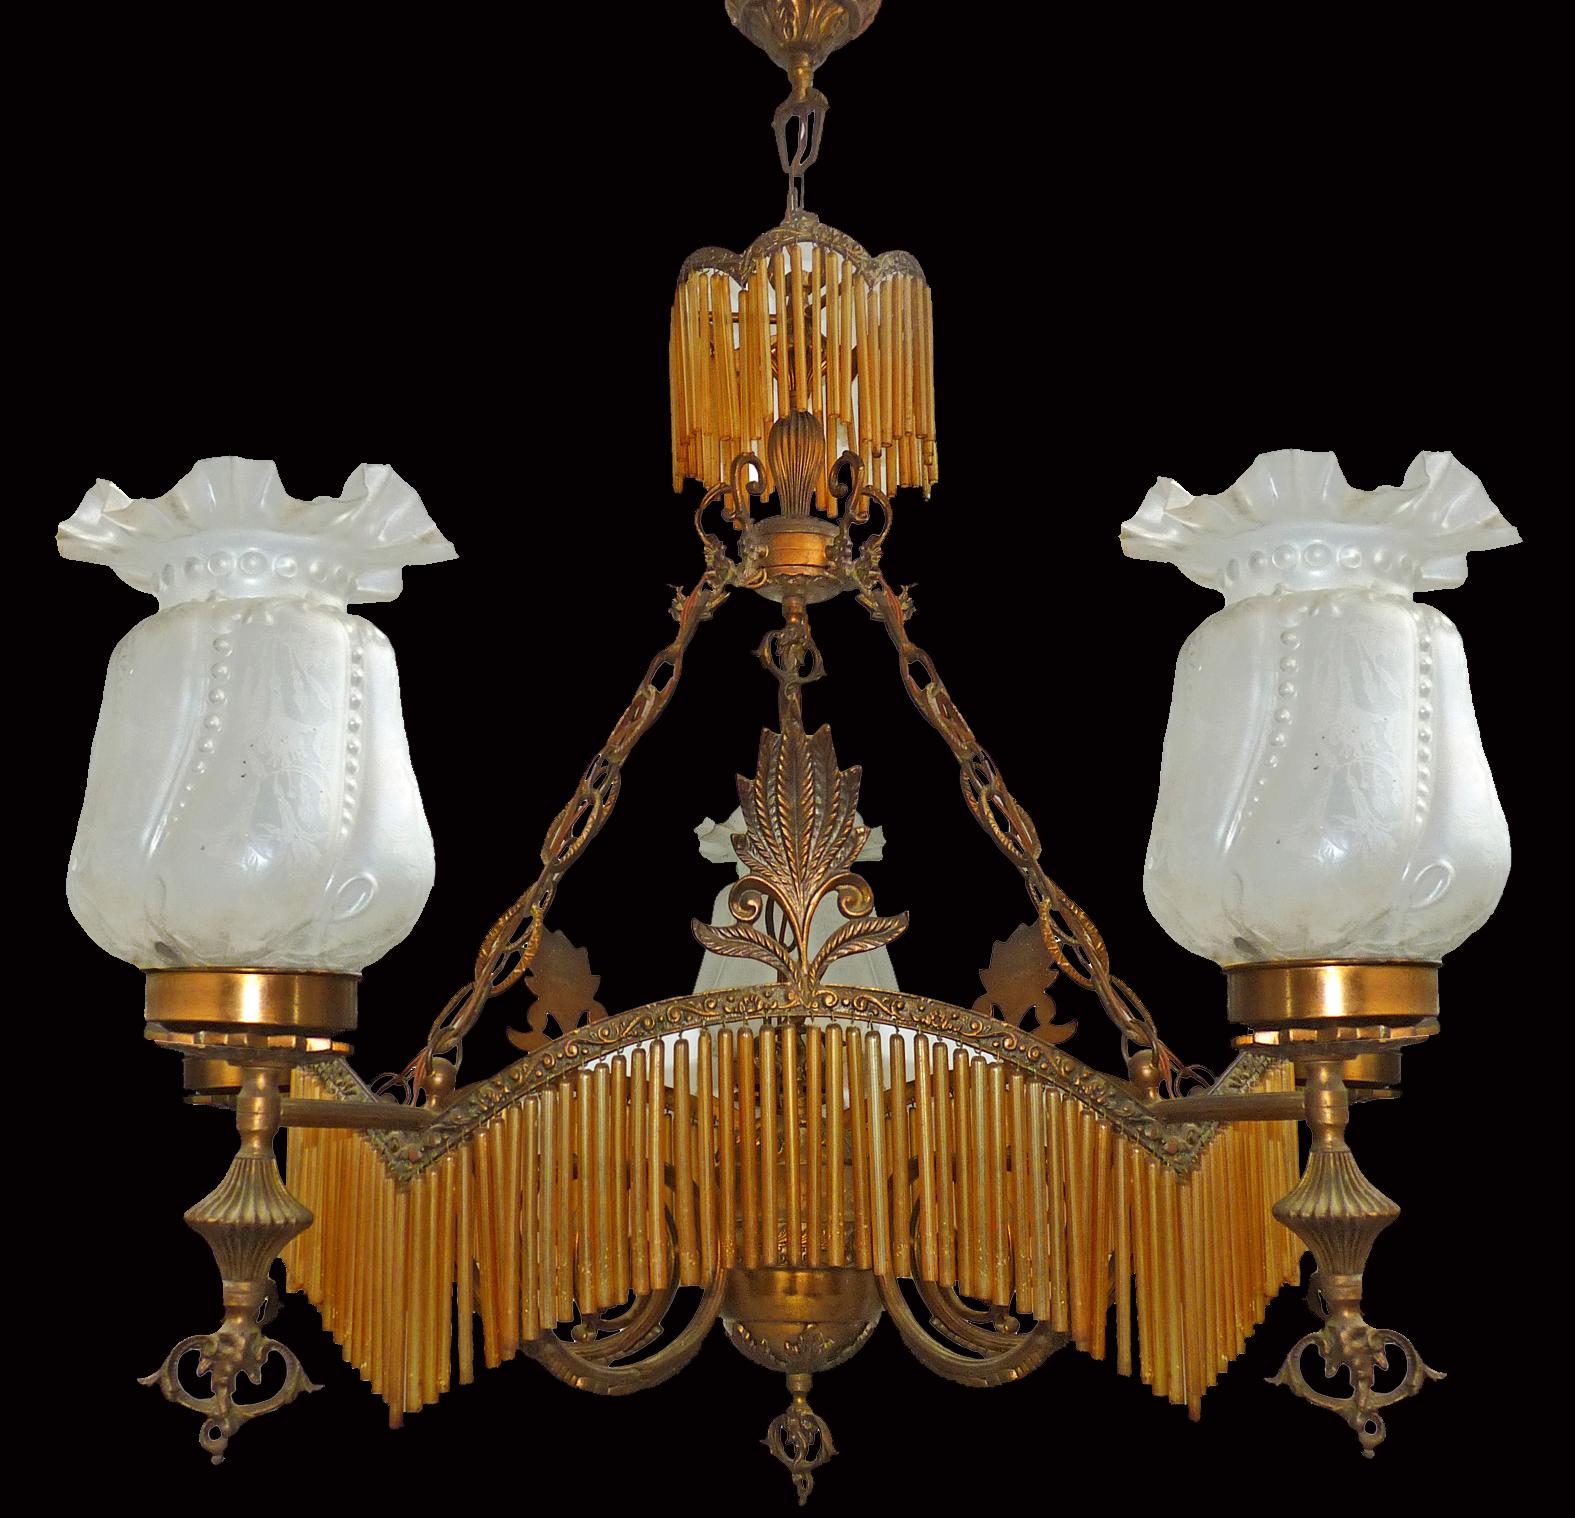 20th Century Large French Art Deco or Nouveau Amber Glass Fringe Hollywood Regency Chandelier